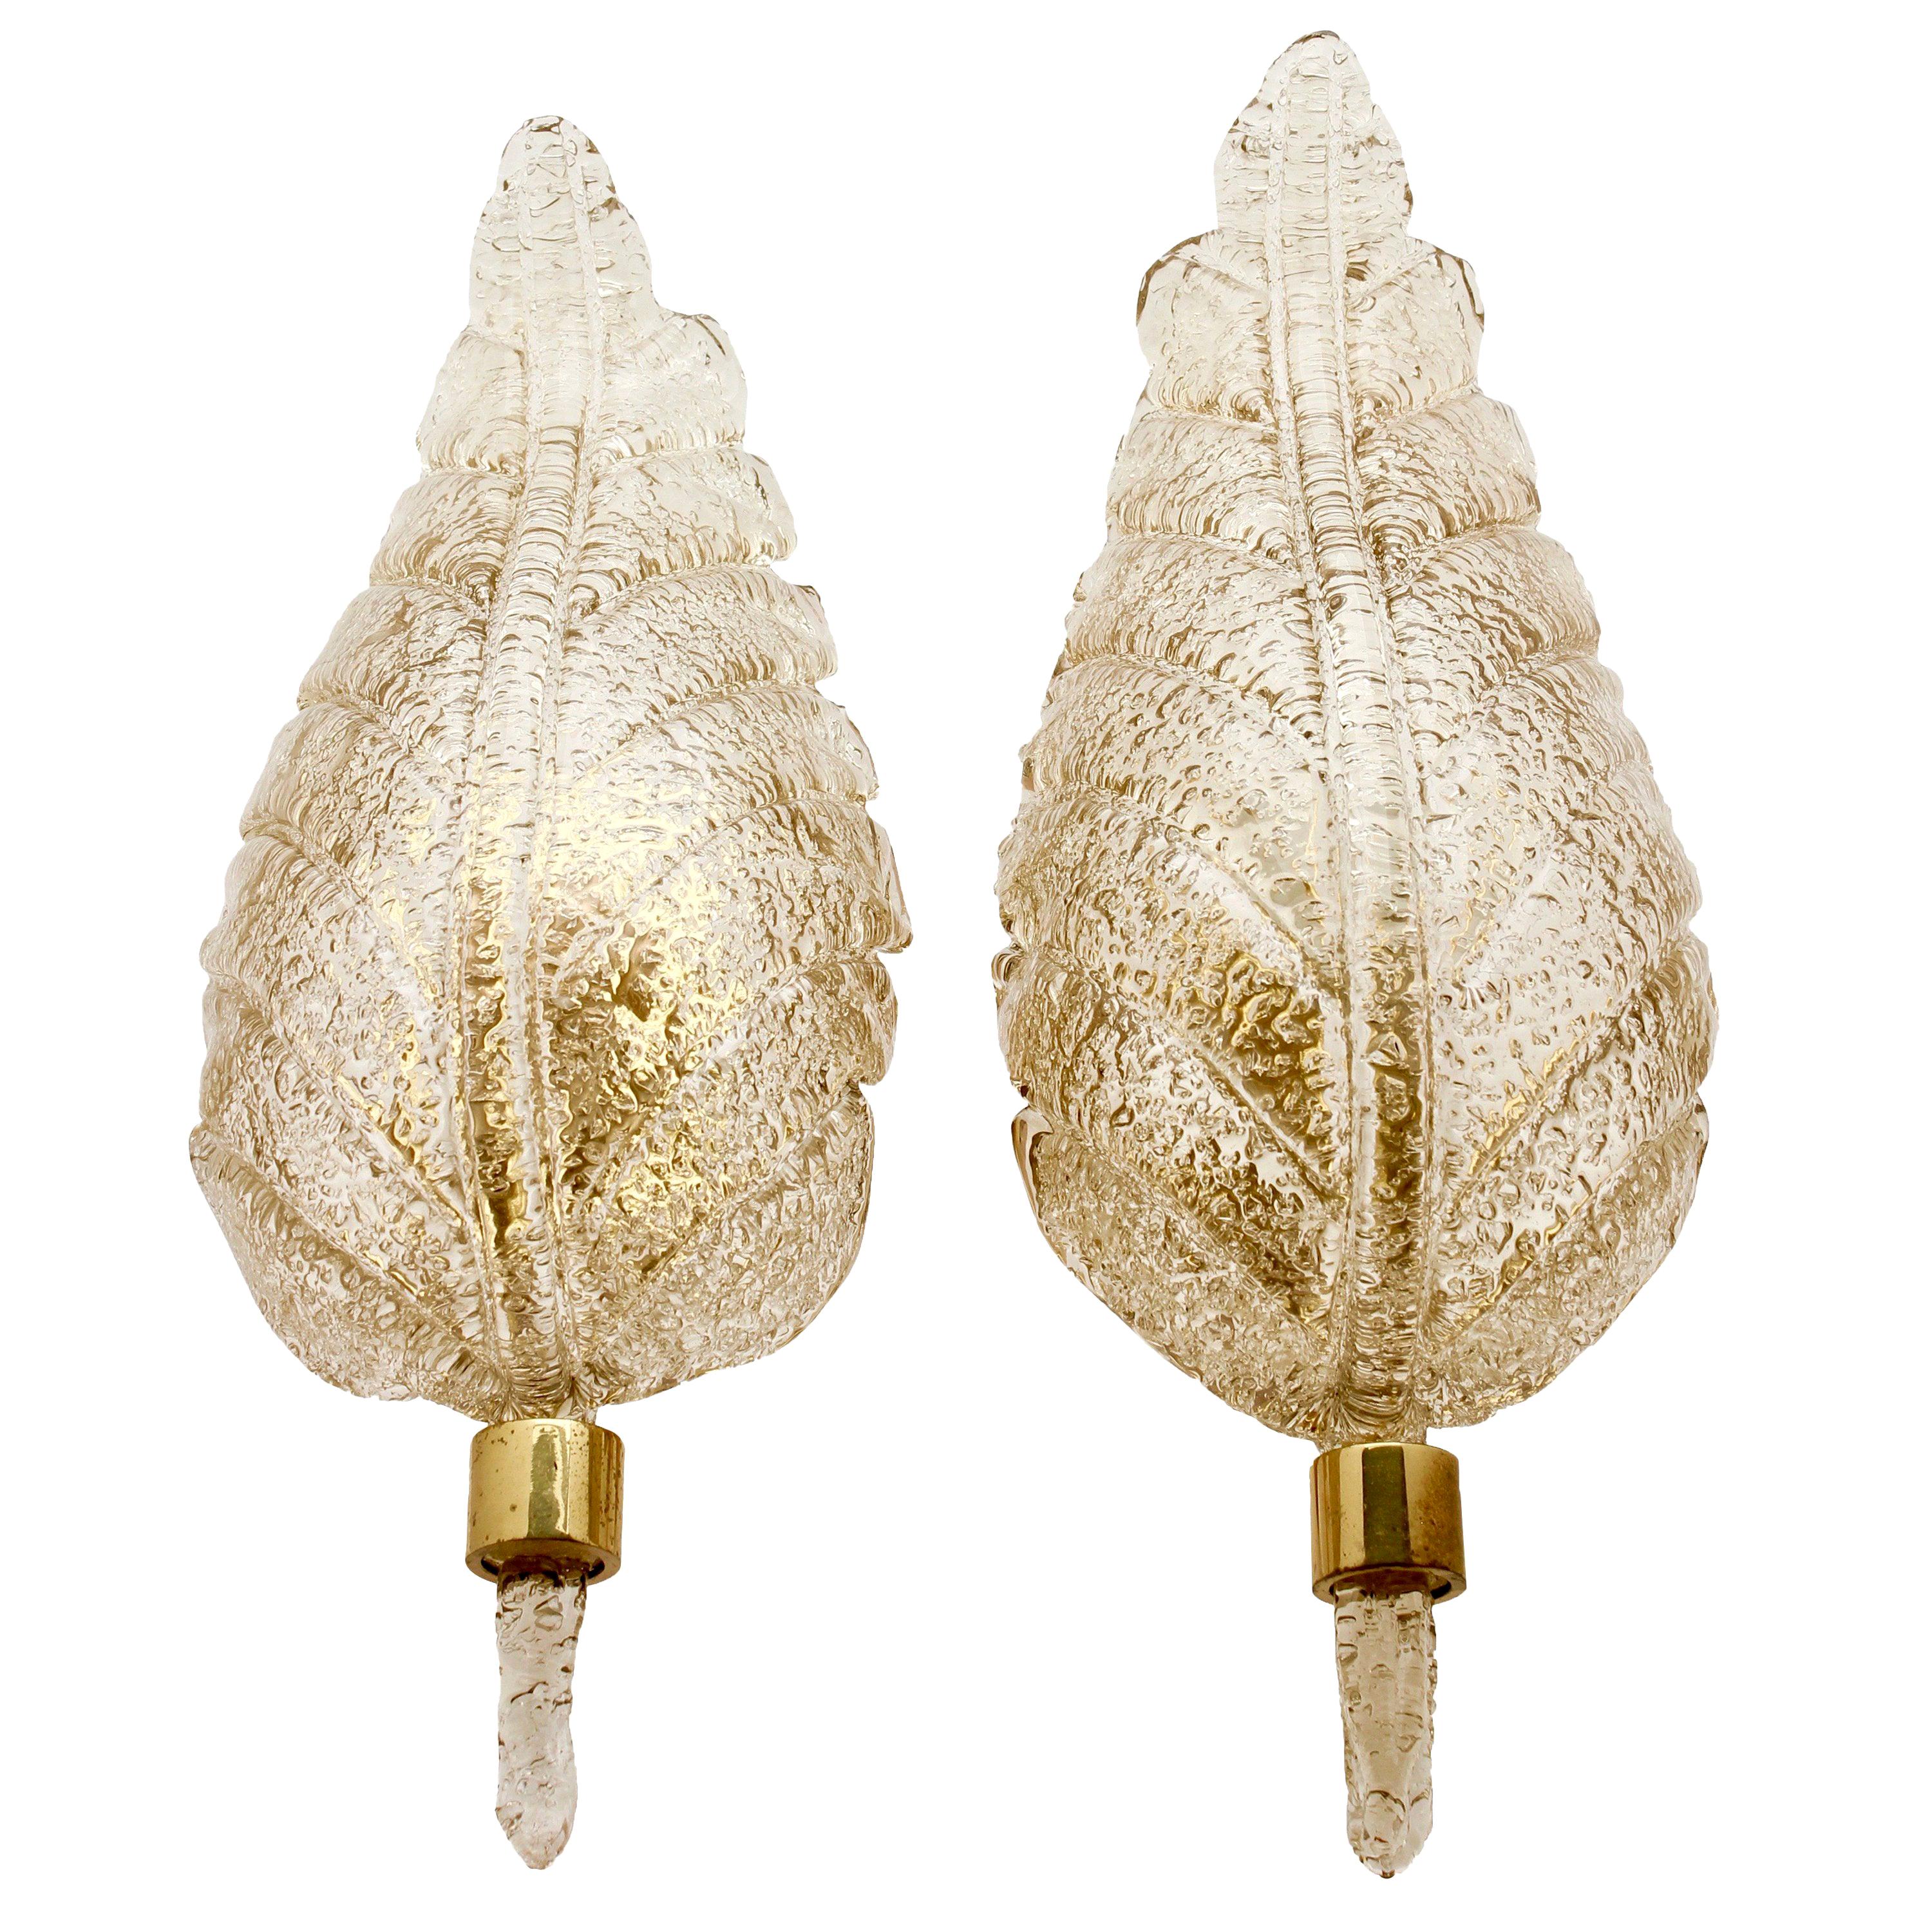 Barovier & Toso Large Murano Art Glass Leaf Sconces 'Wall-Lights', circa 1970s